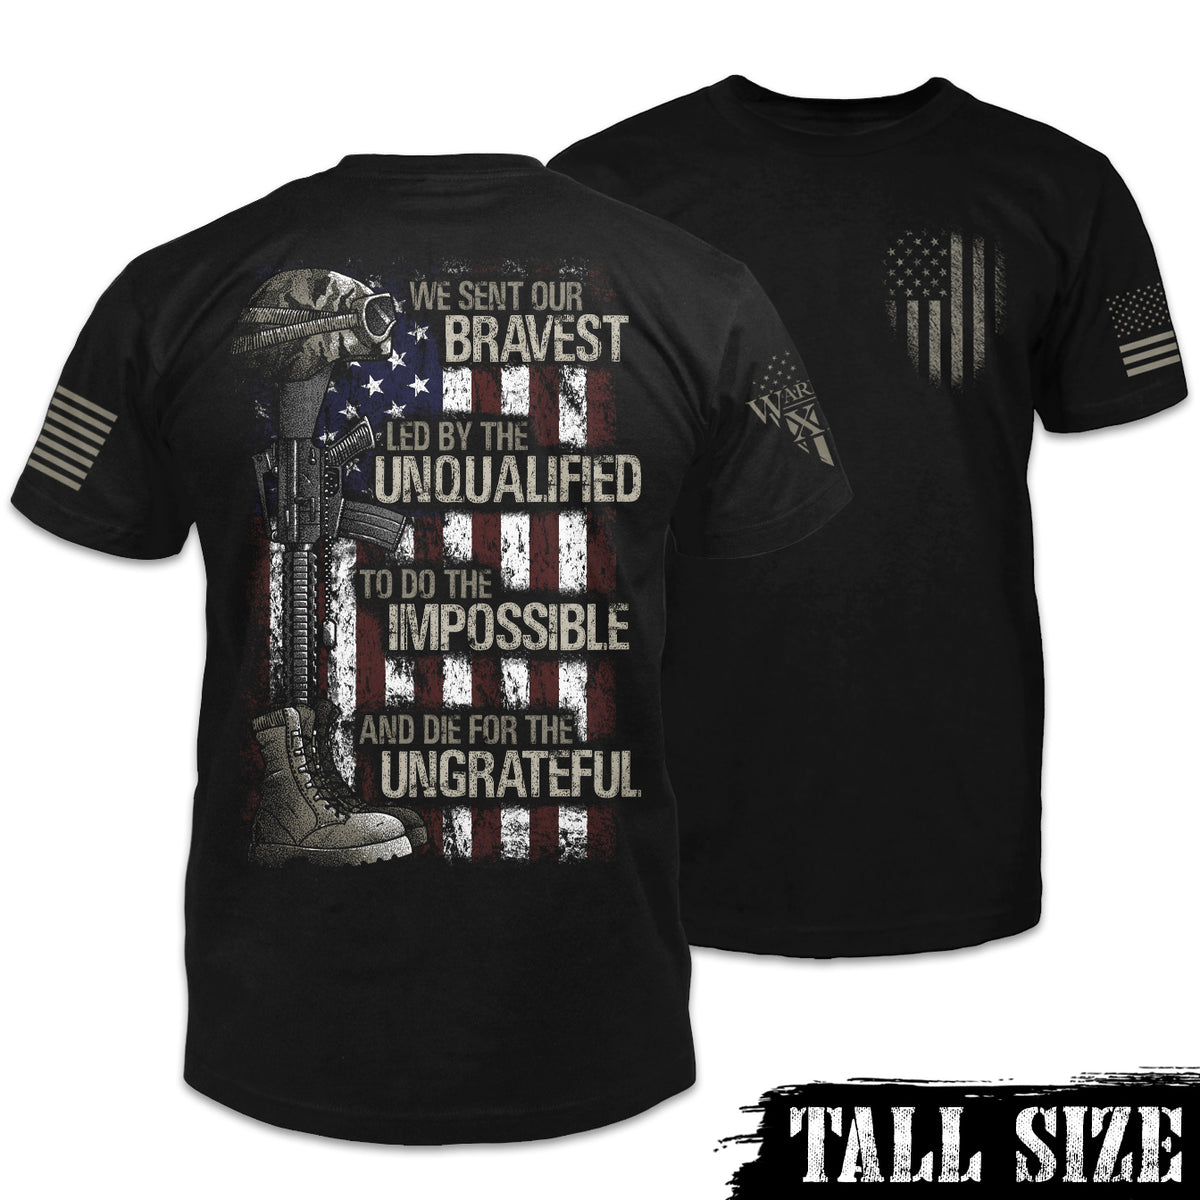 Front & back black tall sized t-shirt with the words "We sent our bravest, Led by the unqualified, To do the impossible, And die for the ungrateful" with a USA flag, soldiers boot, helmet and gun printed on the shirt.